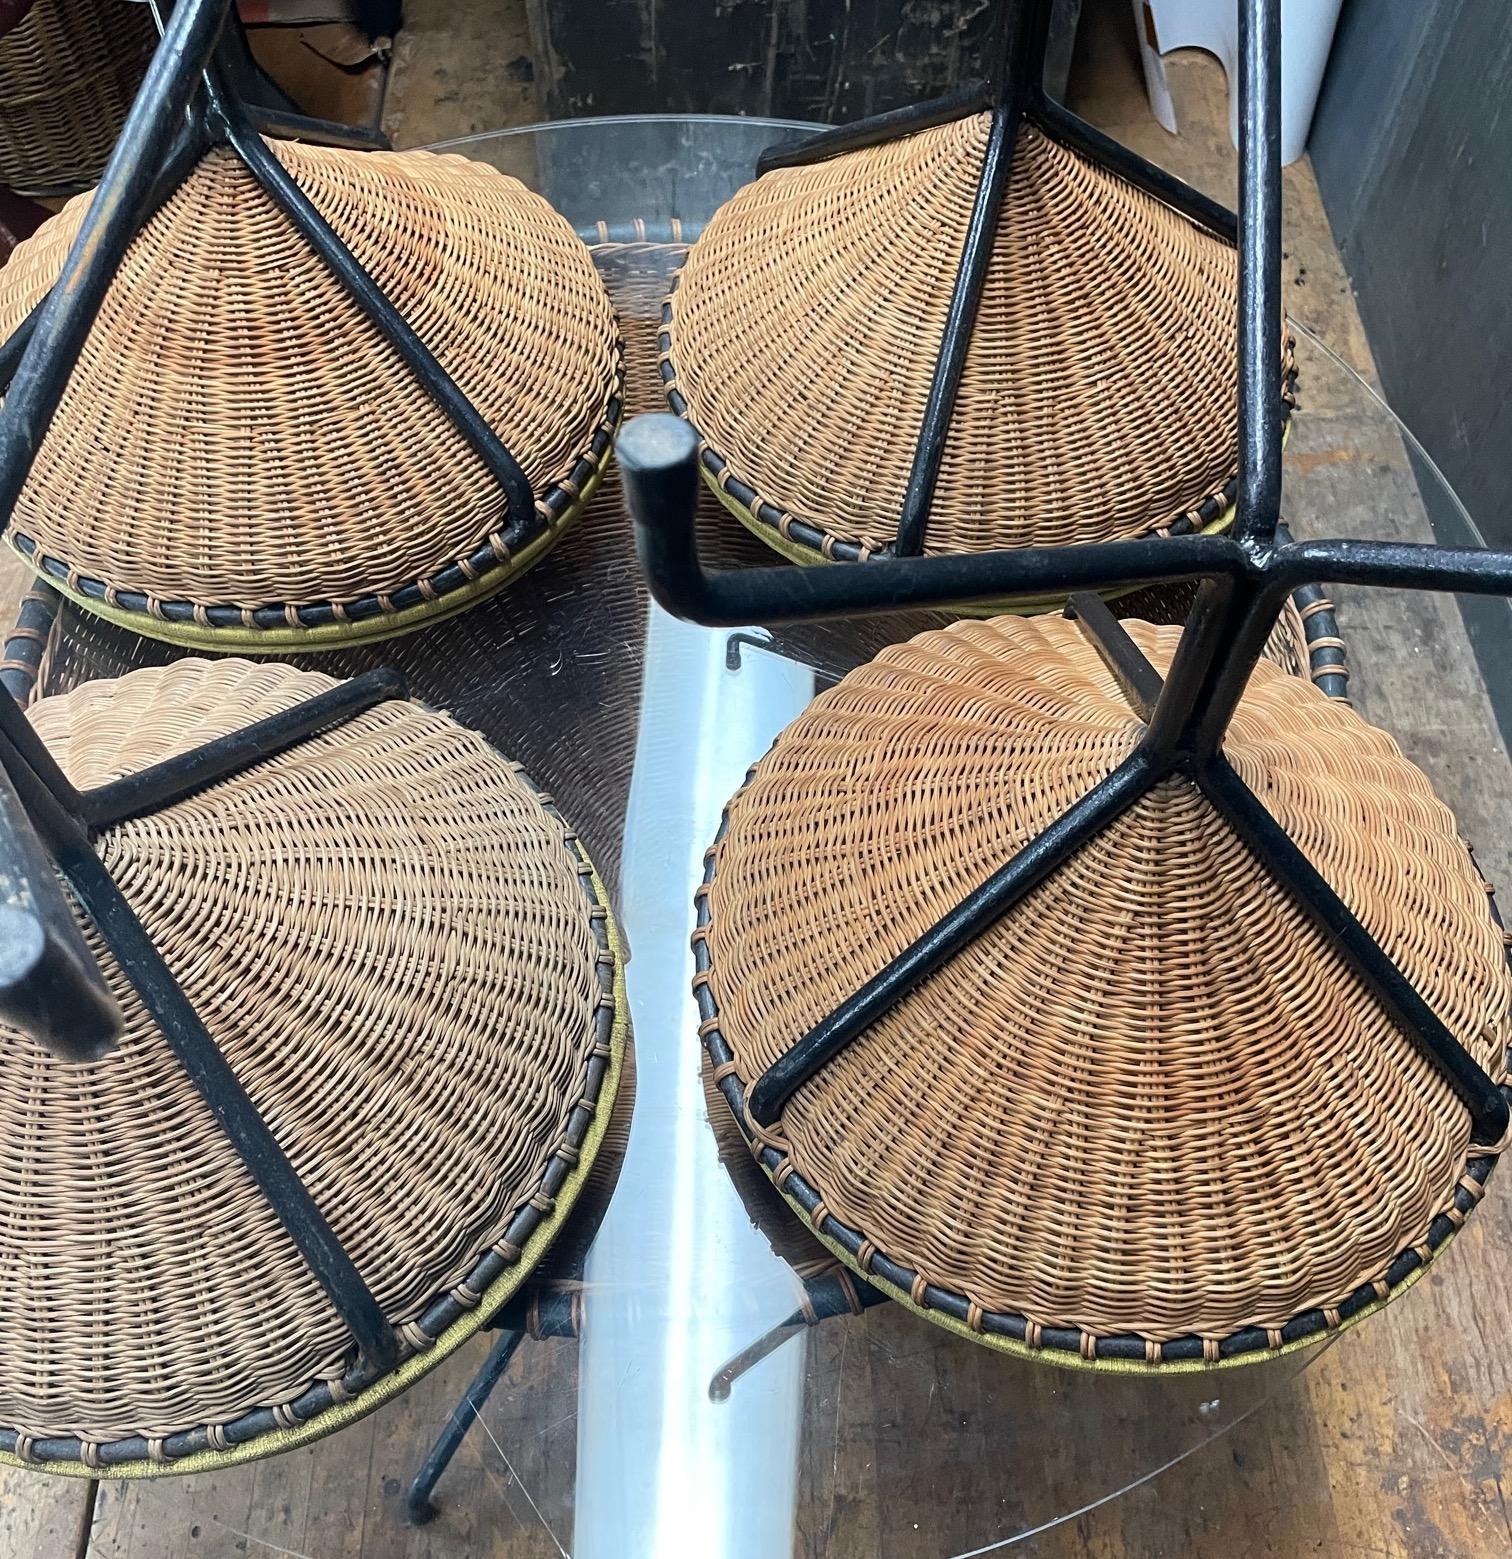 1950s California Design Danny Ho Fong Wicker Iron Tiki Dining Table Stool Set For Sale 4